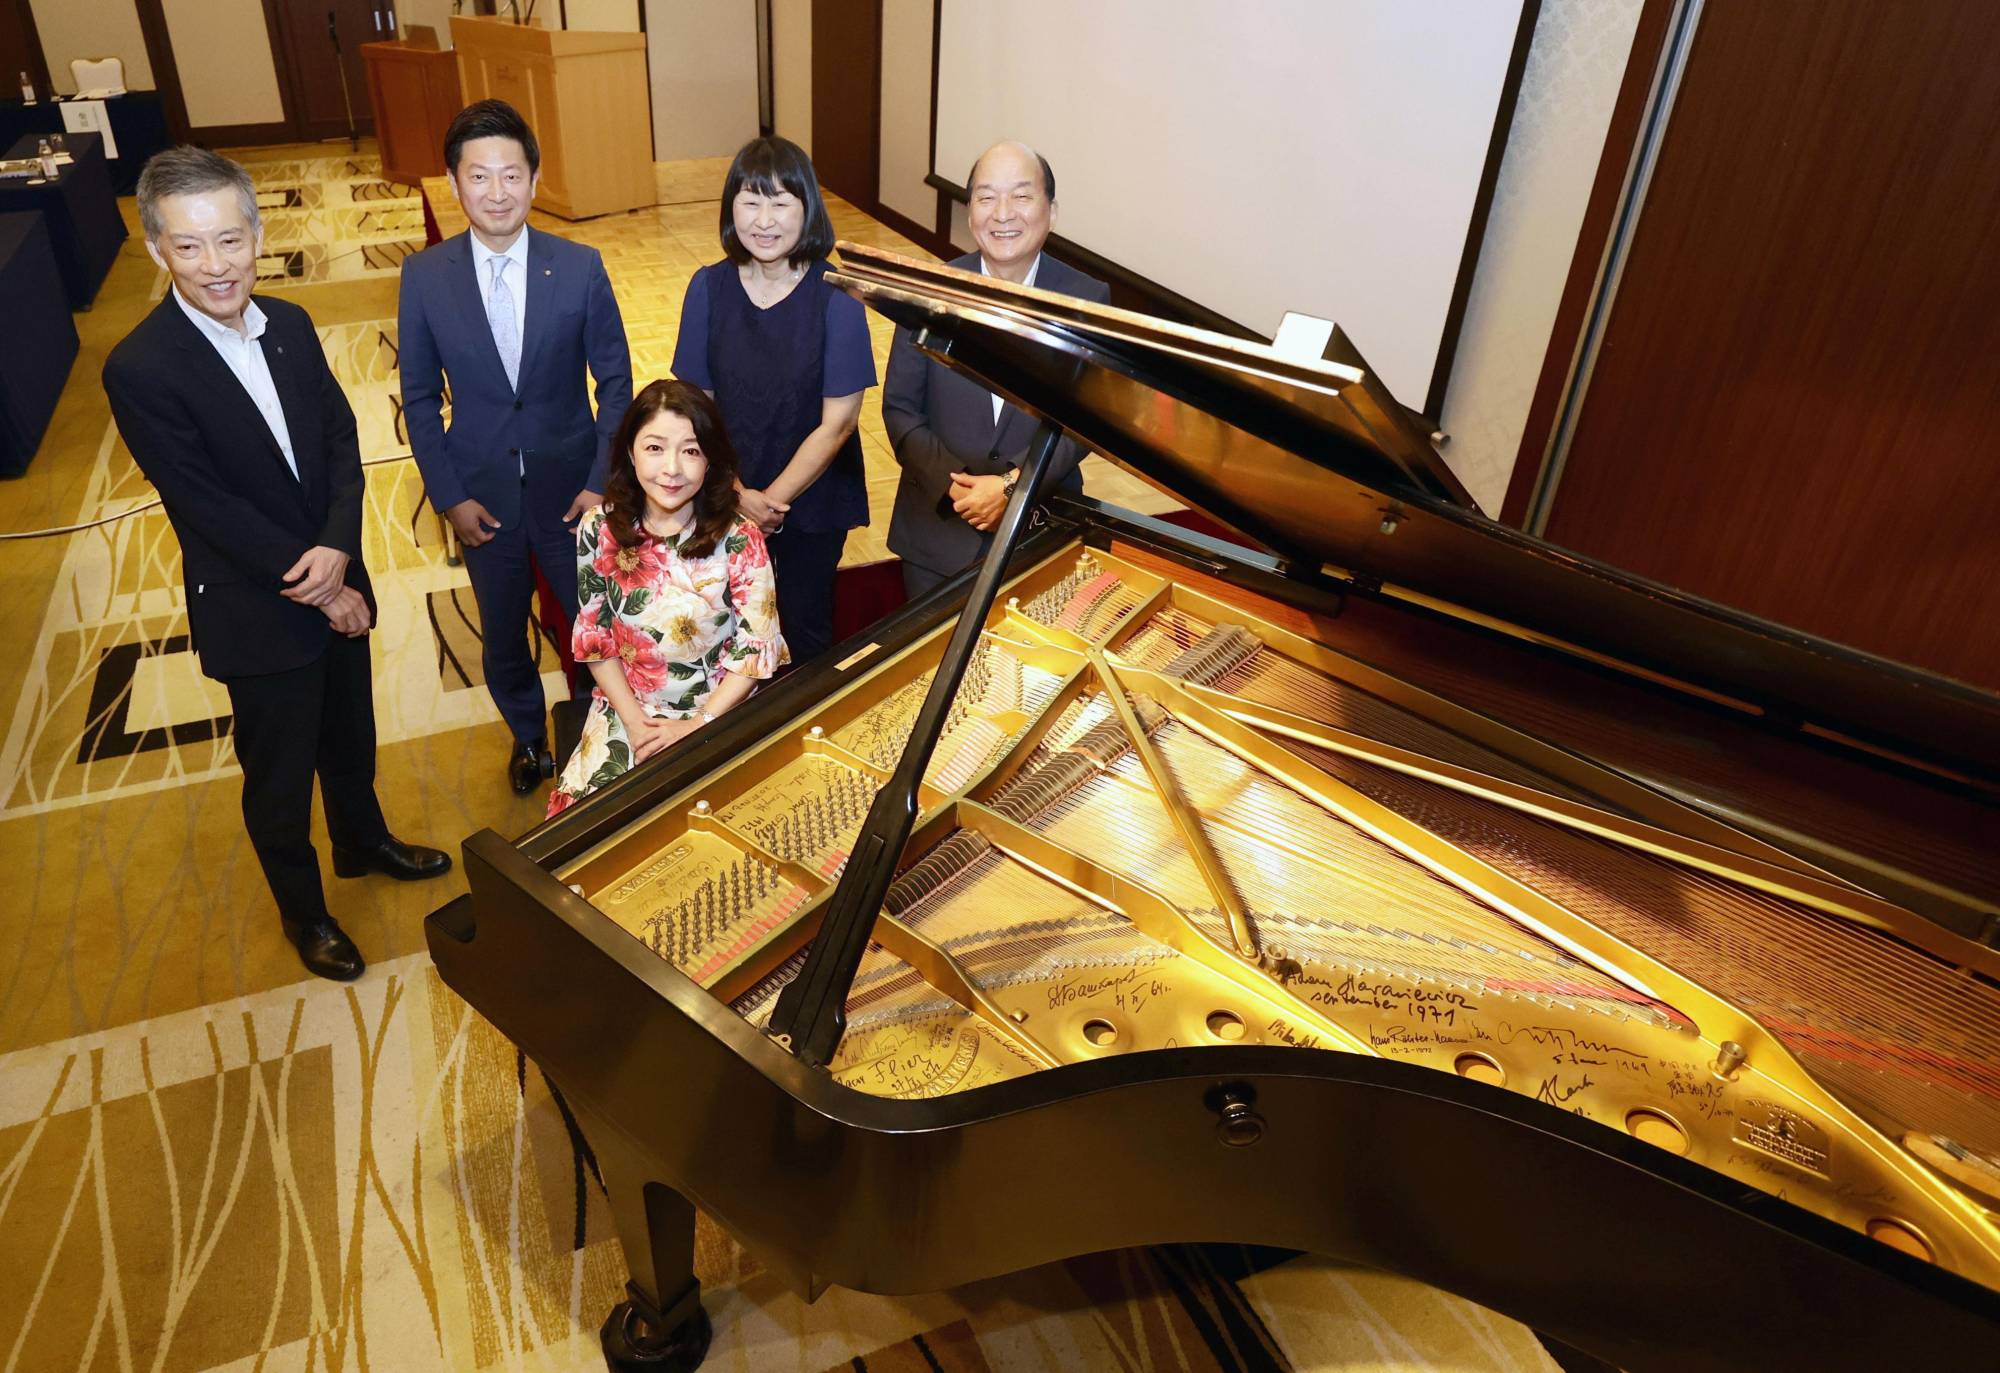 Members of the piano conservation project committee in Fukuoka on July 29 | NISHINIPPON SHIMBUN